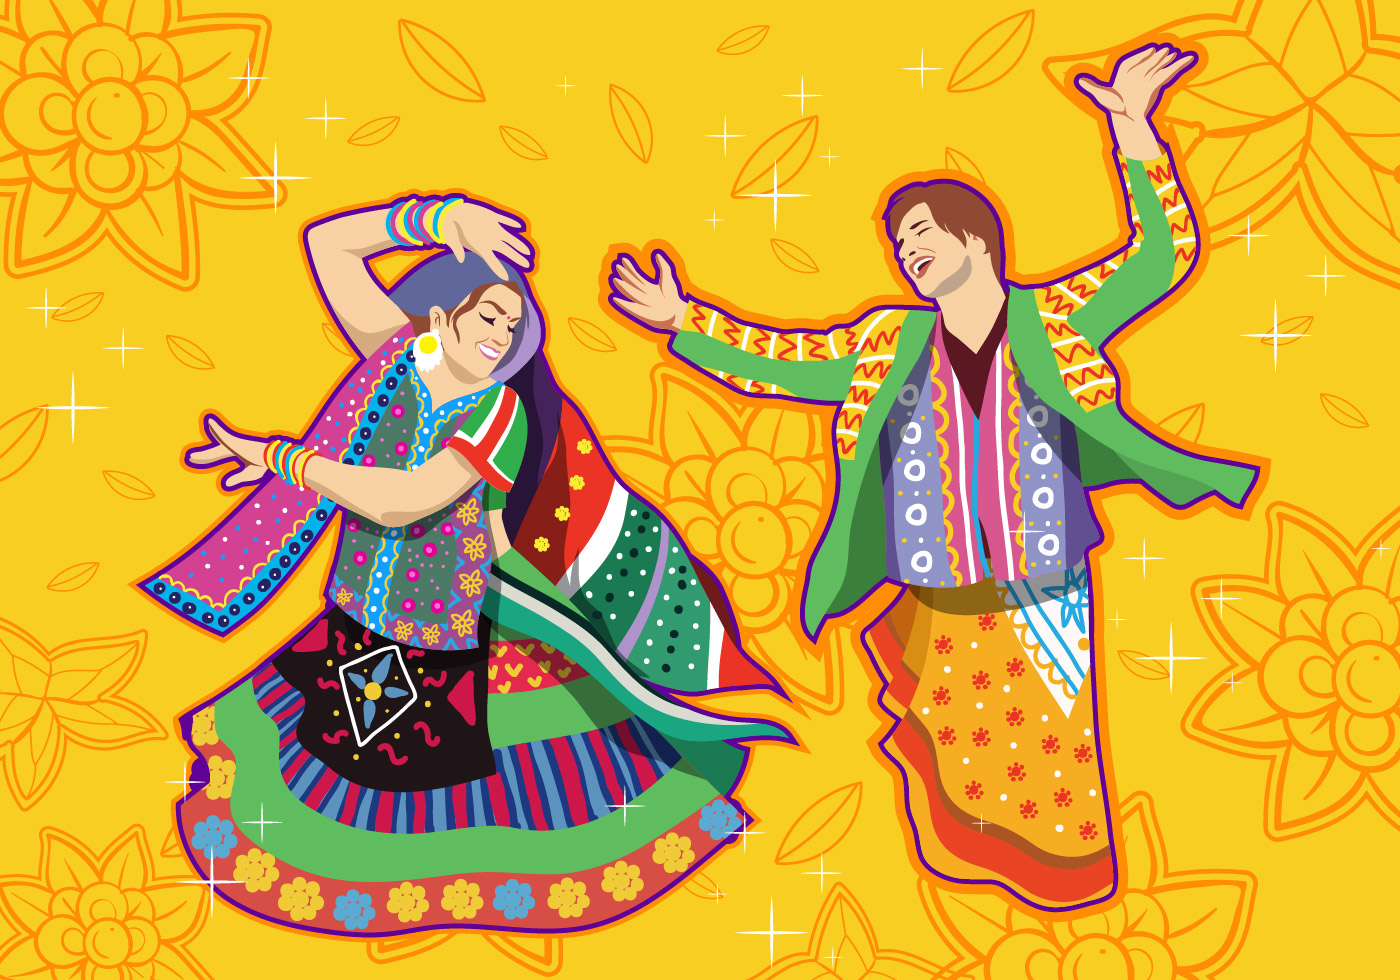 Gujarati Vector Art, Icons, and Graphics for Free Download